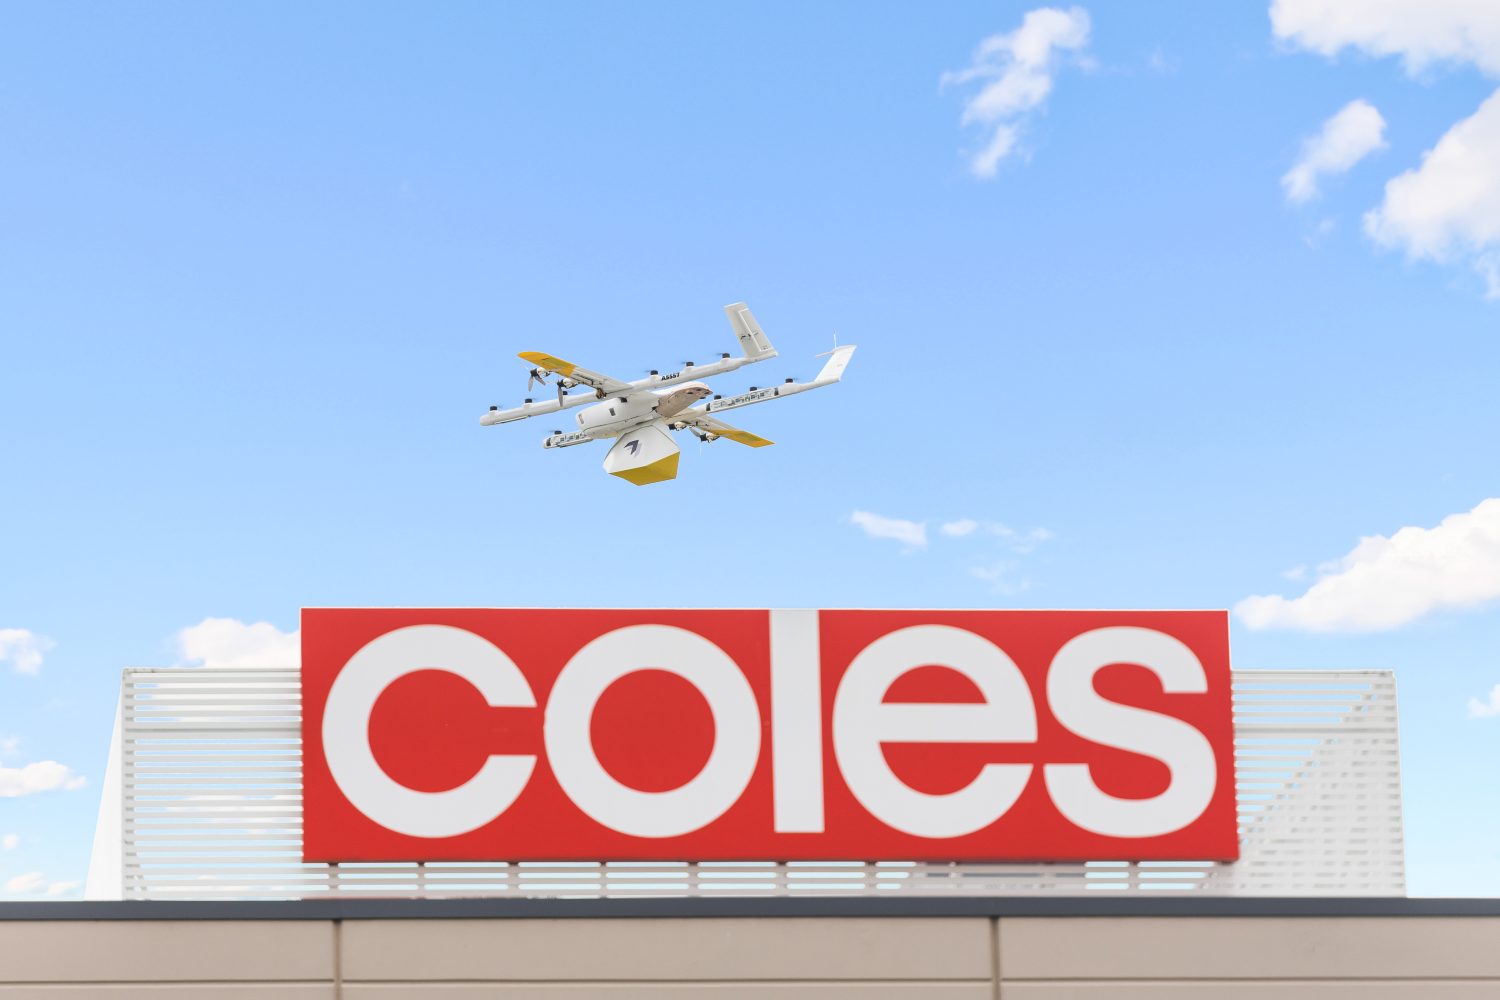 Wing Coles drone delivery